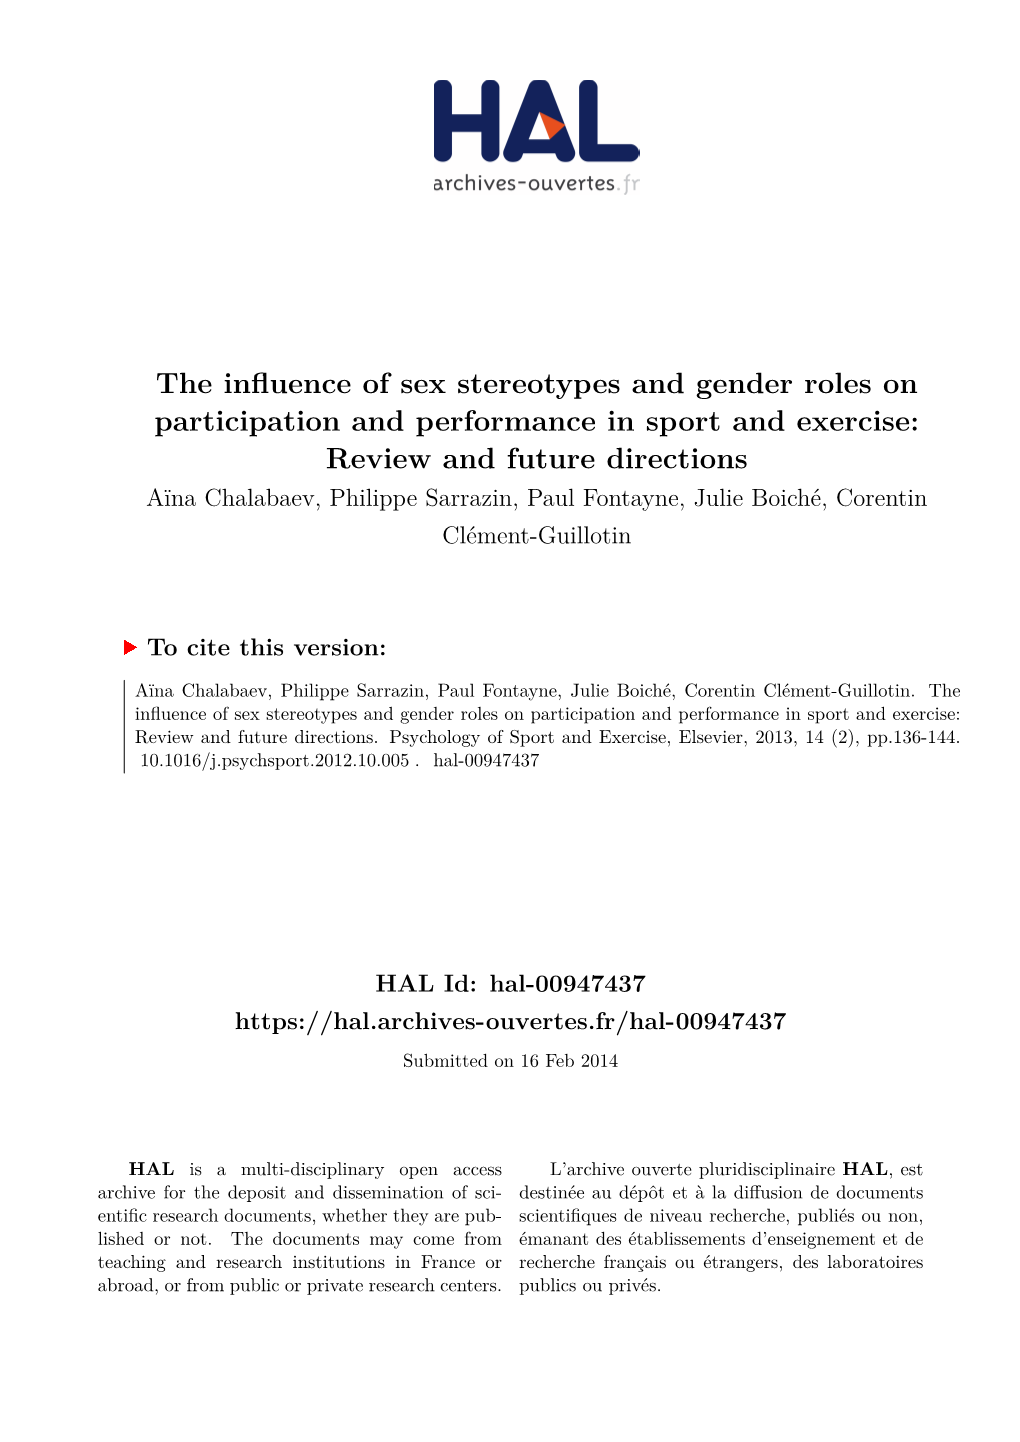 The Influence of Sex Stereotypes and Gender Roles on Participation And